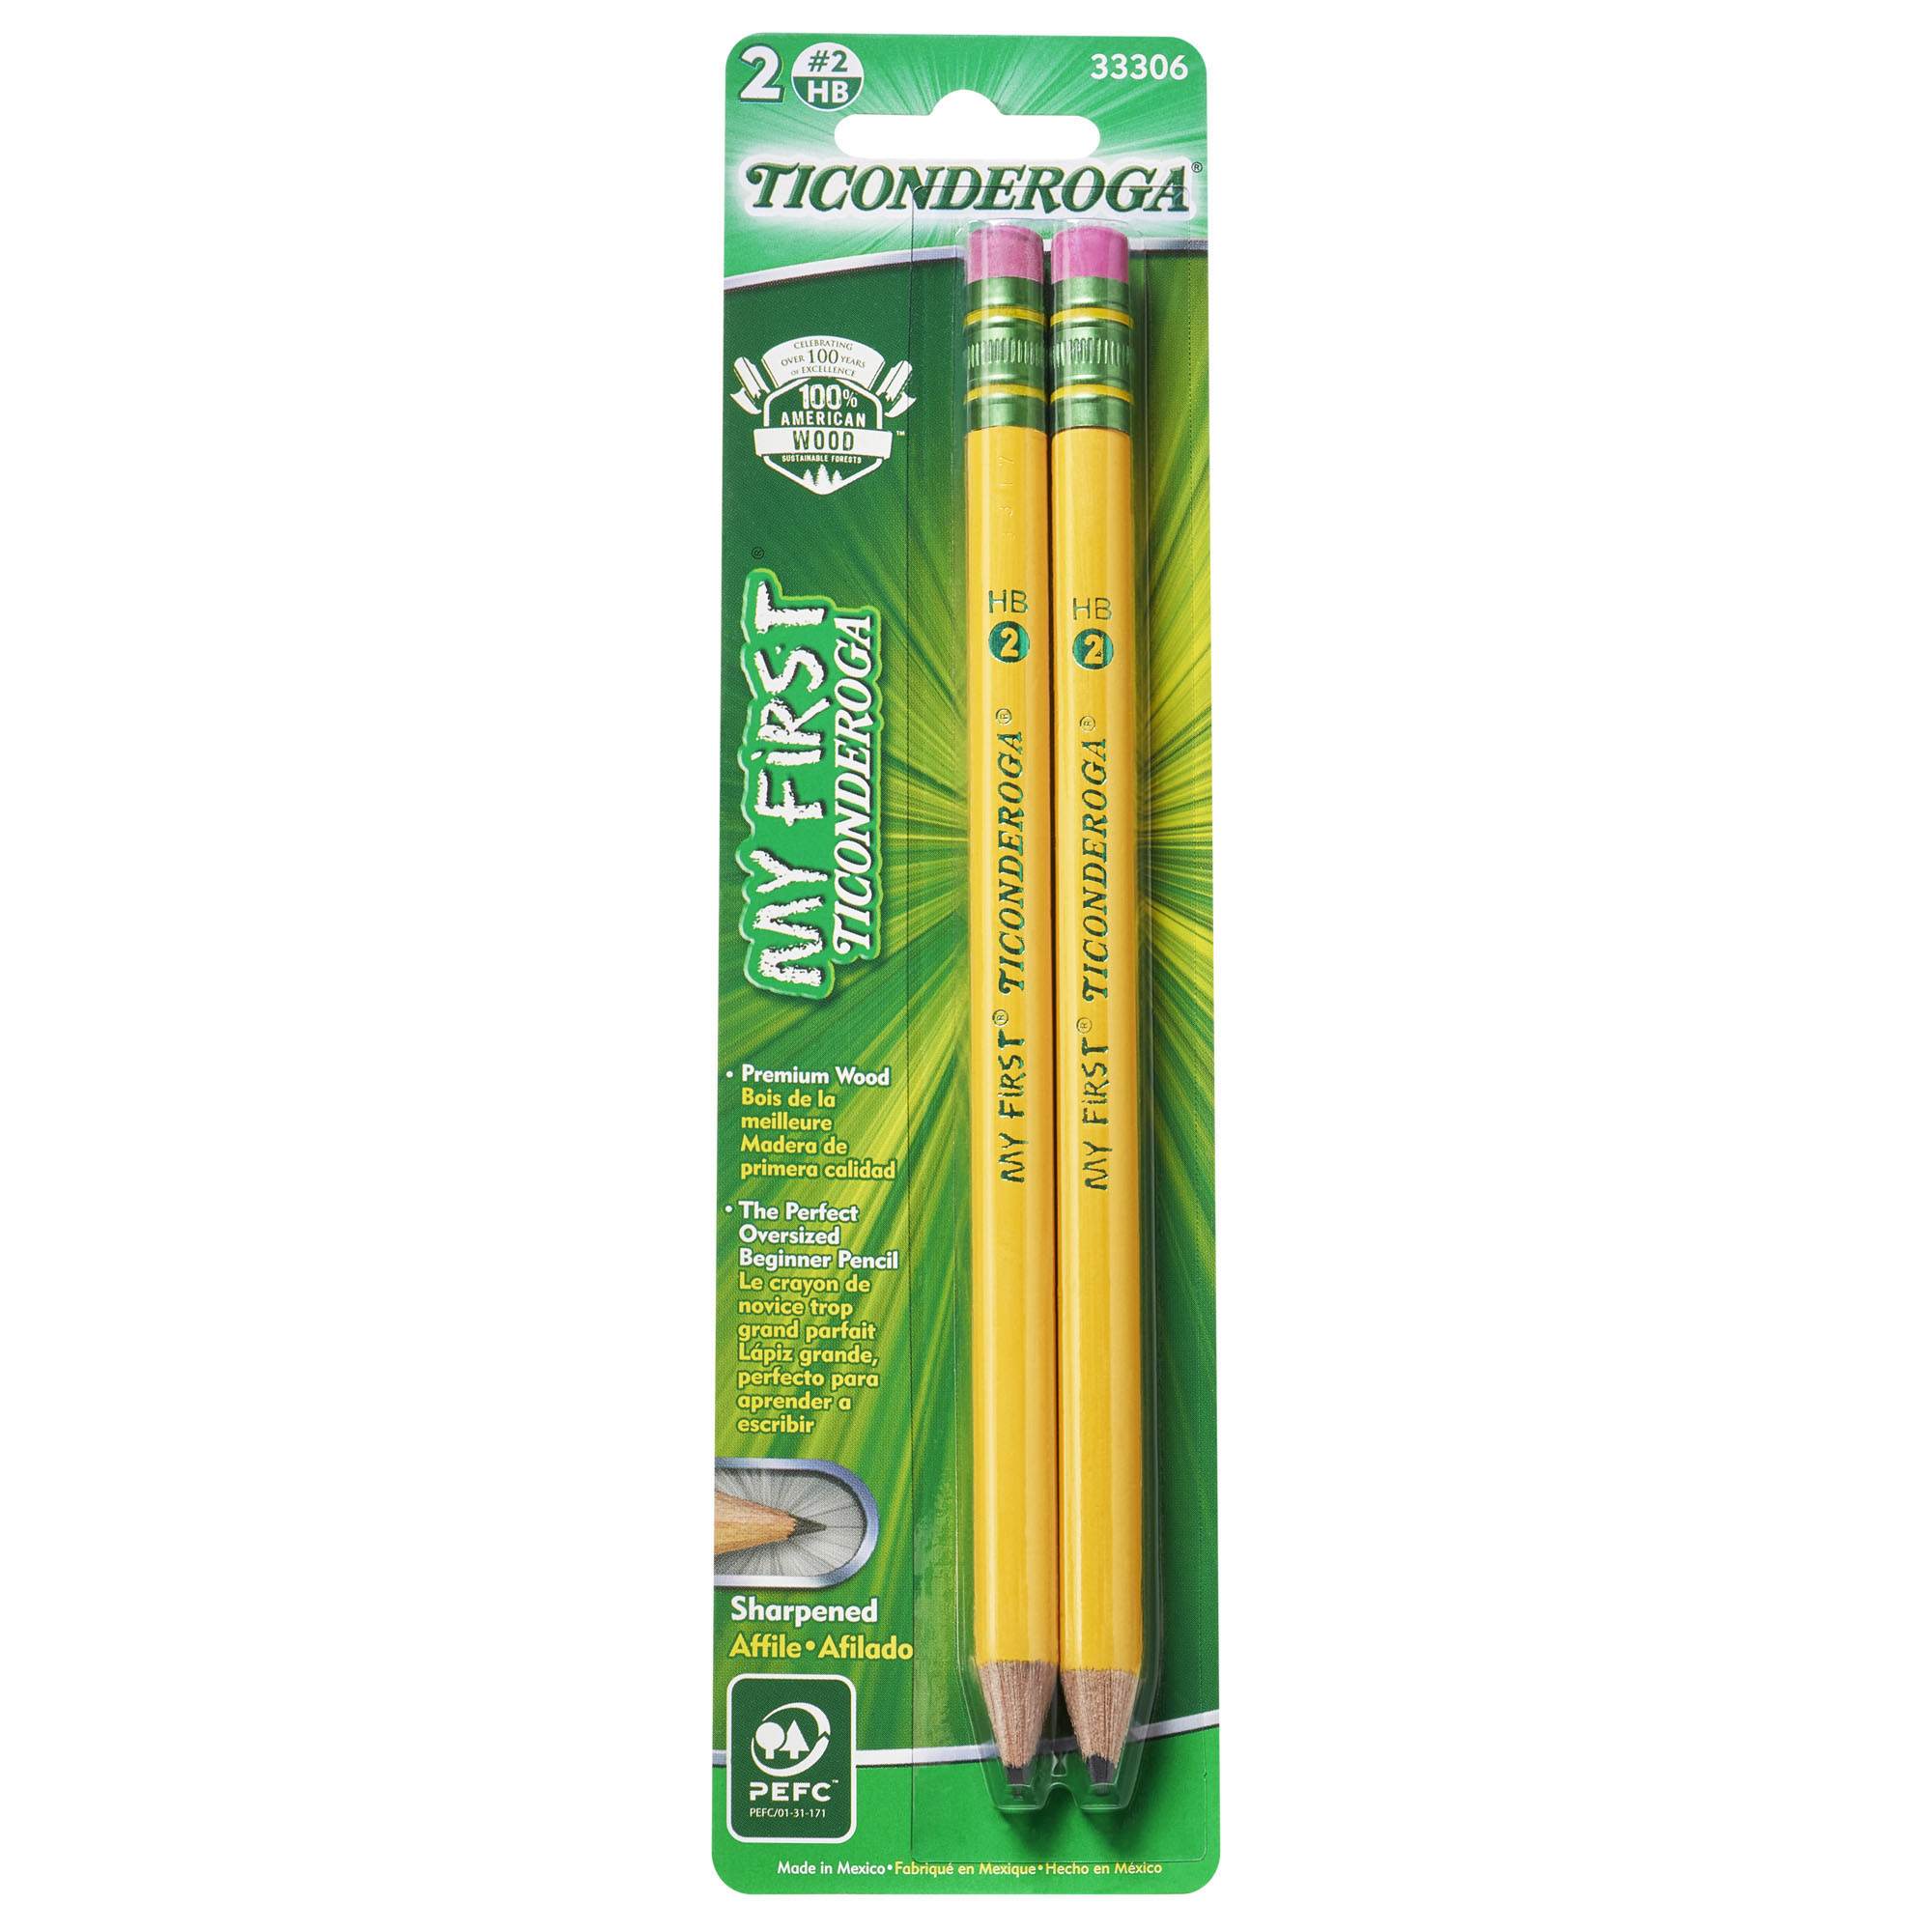 Handwriting Whiteboard Dry Erase Set, 2-Sided, Ruled/Plain, with  Marker/Eraser, 9 x 12 - PACAC9877C1, Dixon Ticonderoga Co - Pacon